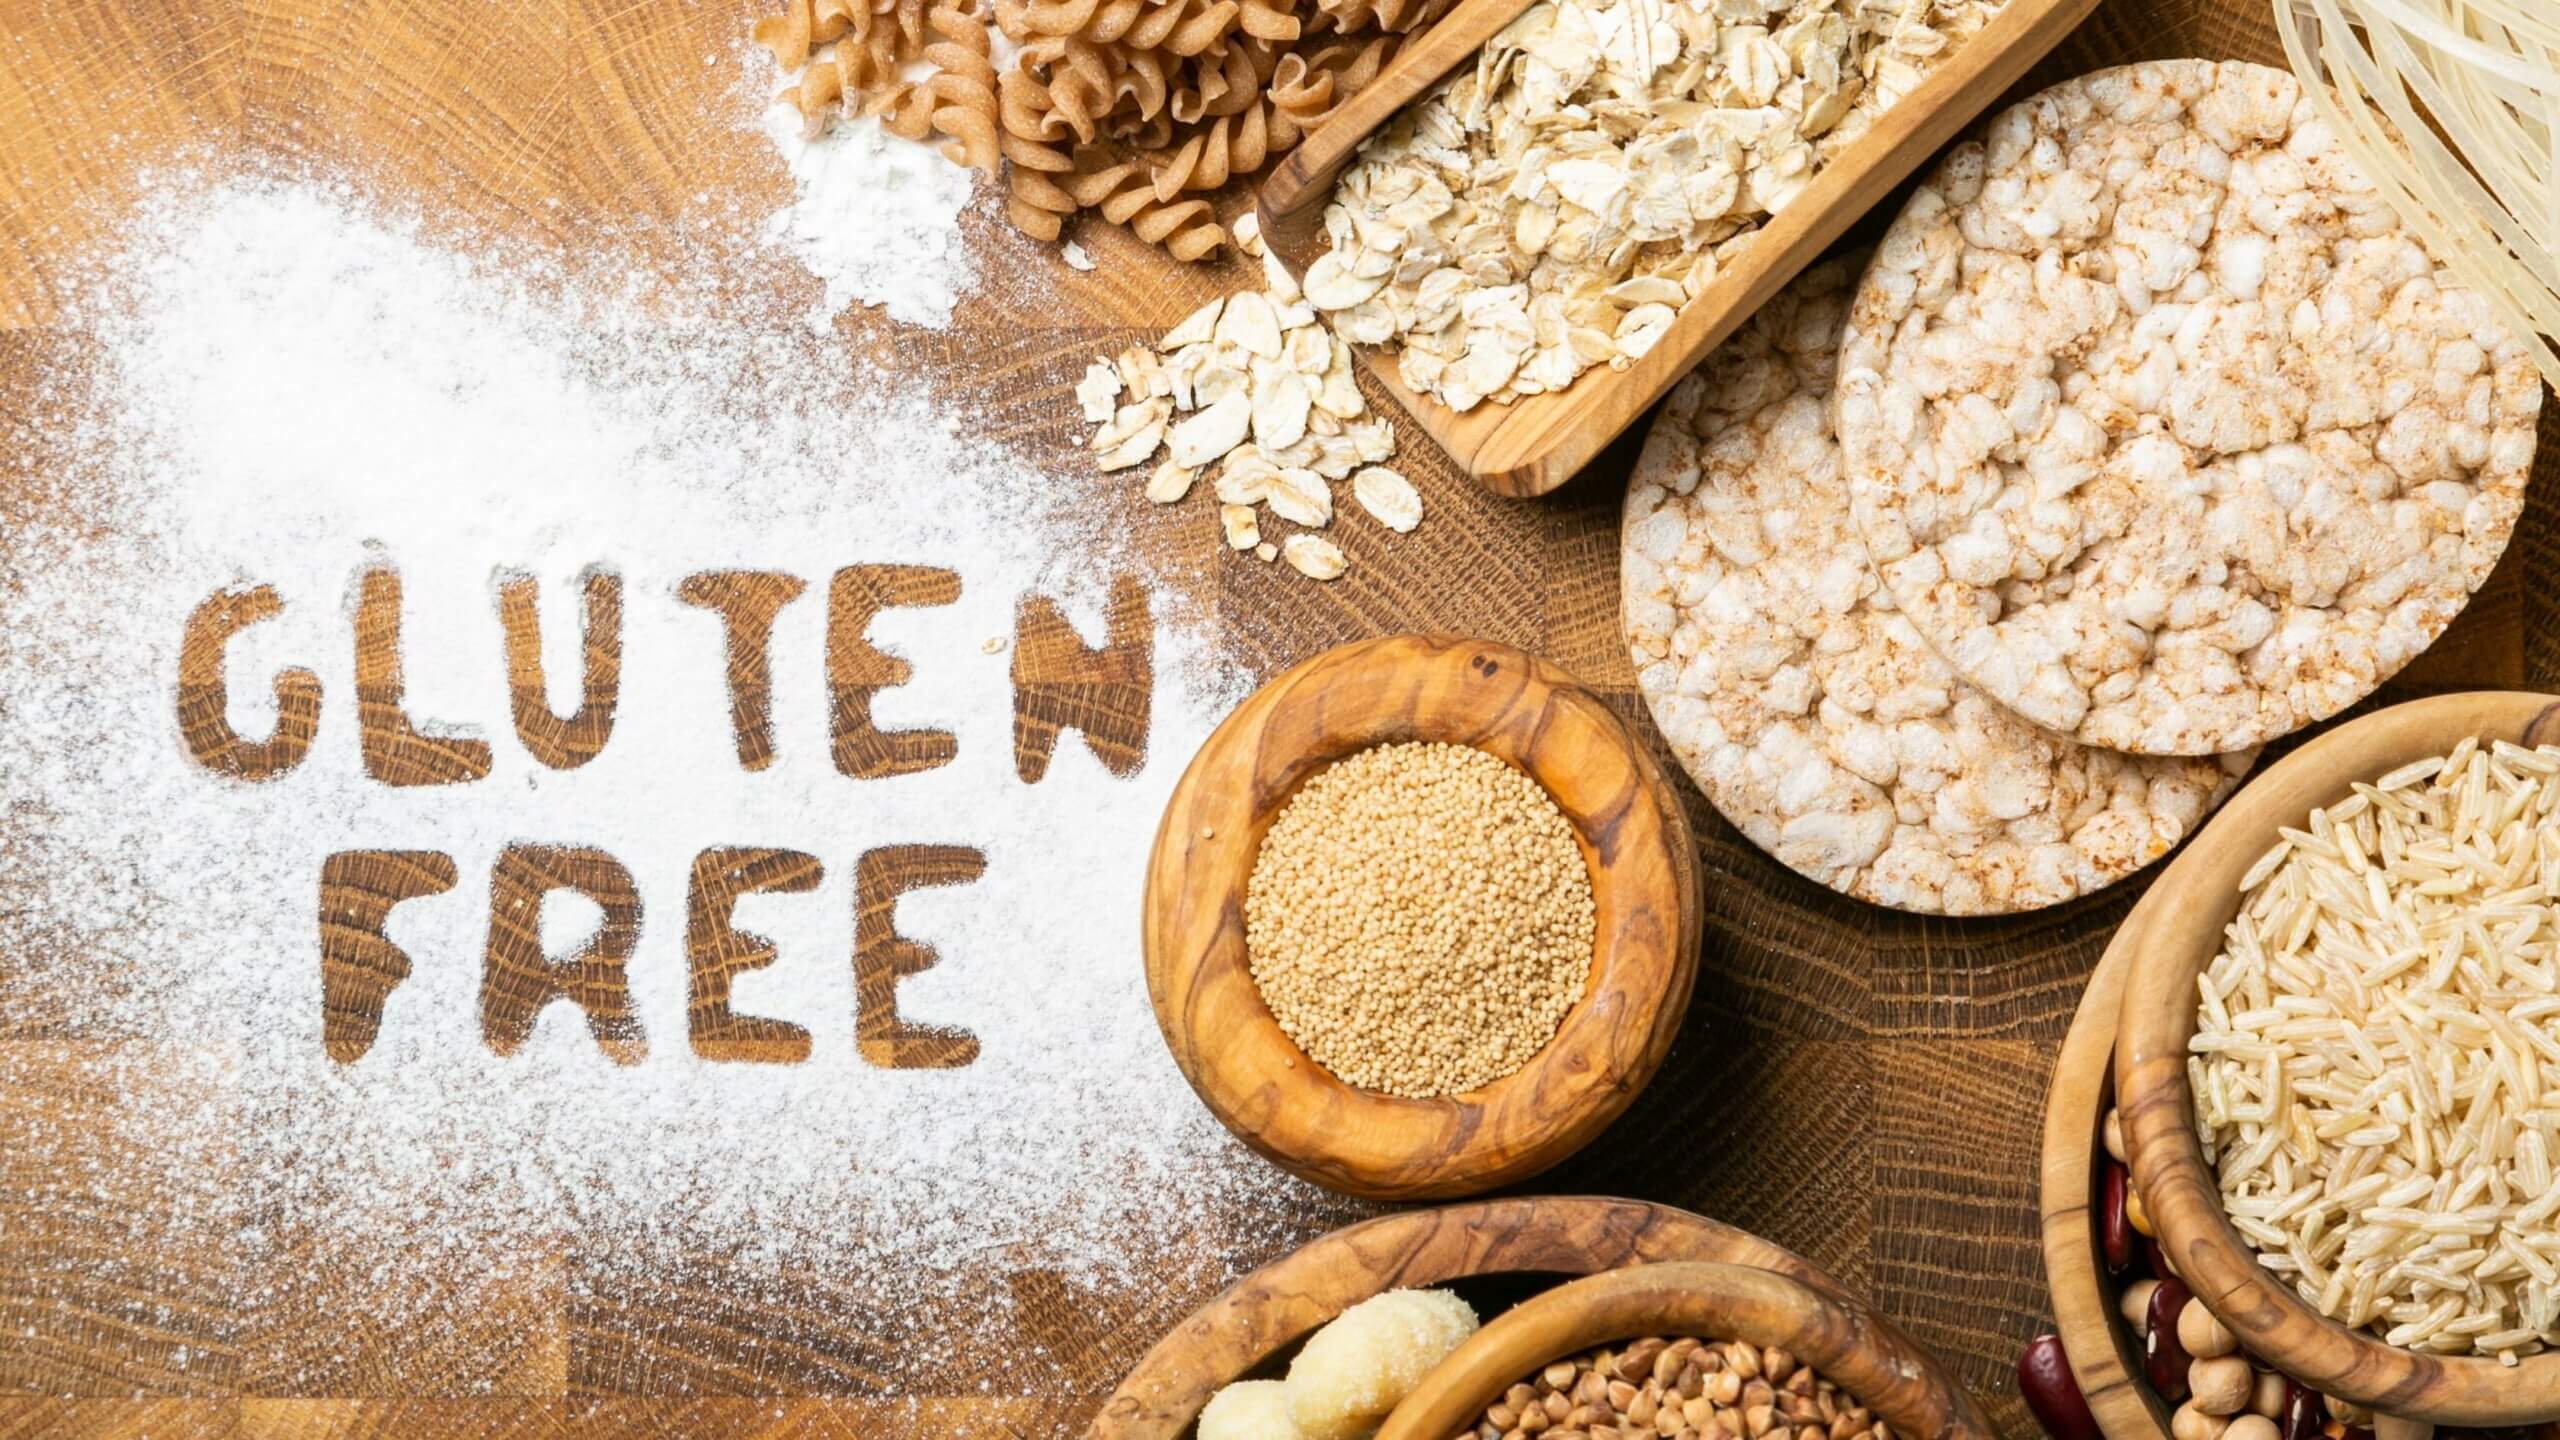 The negative side effects of a gluten-free diet